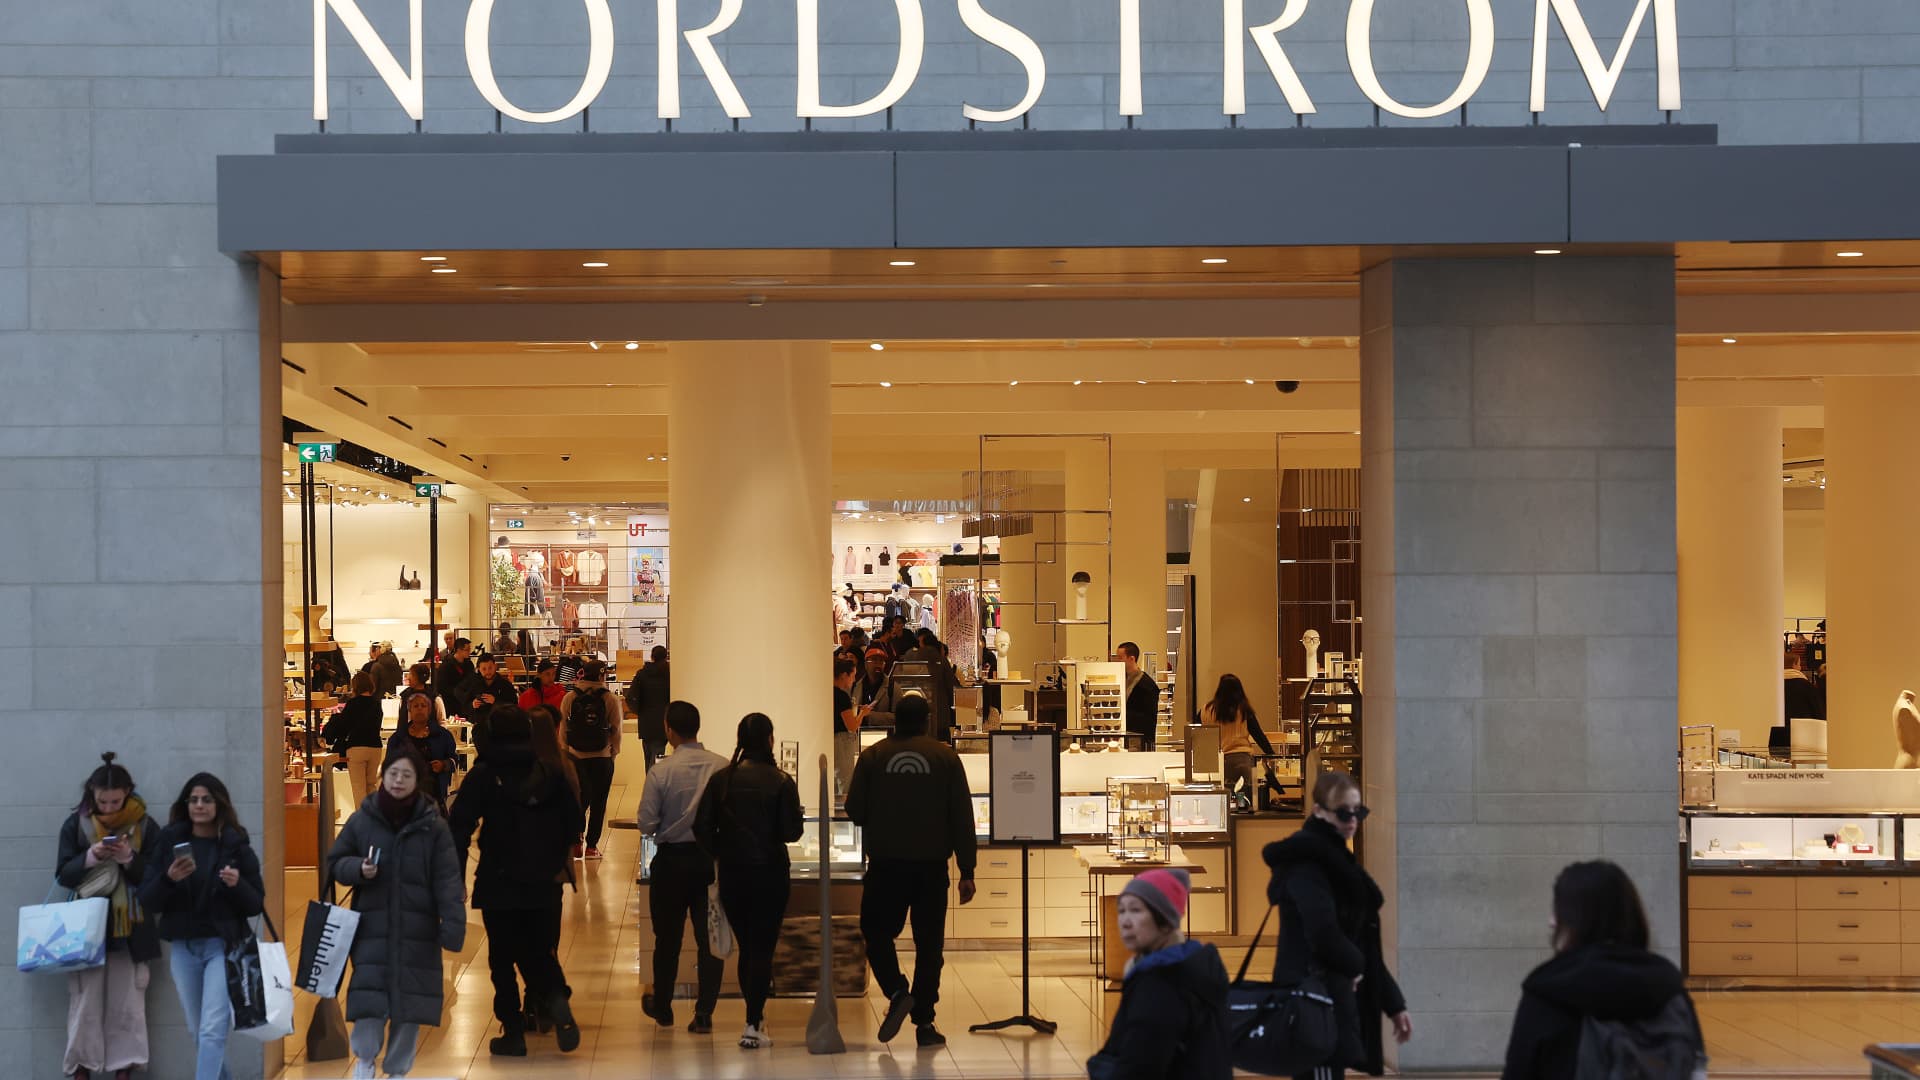 Nordstrom tops Wall Street’s quarterly expectations, even as it braces for sales declines